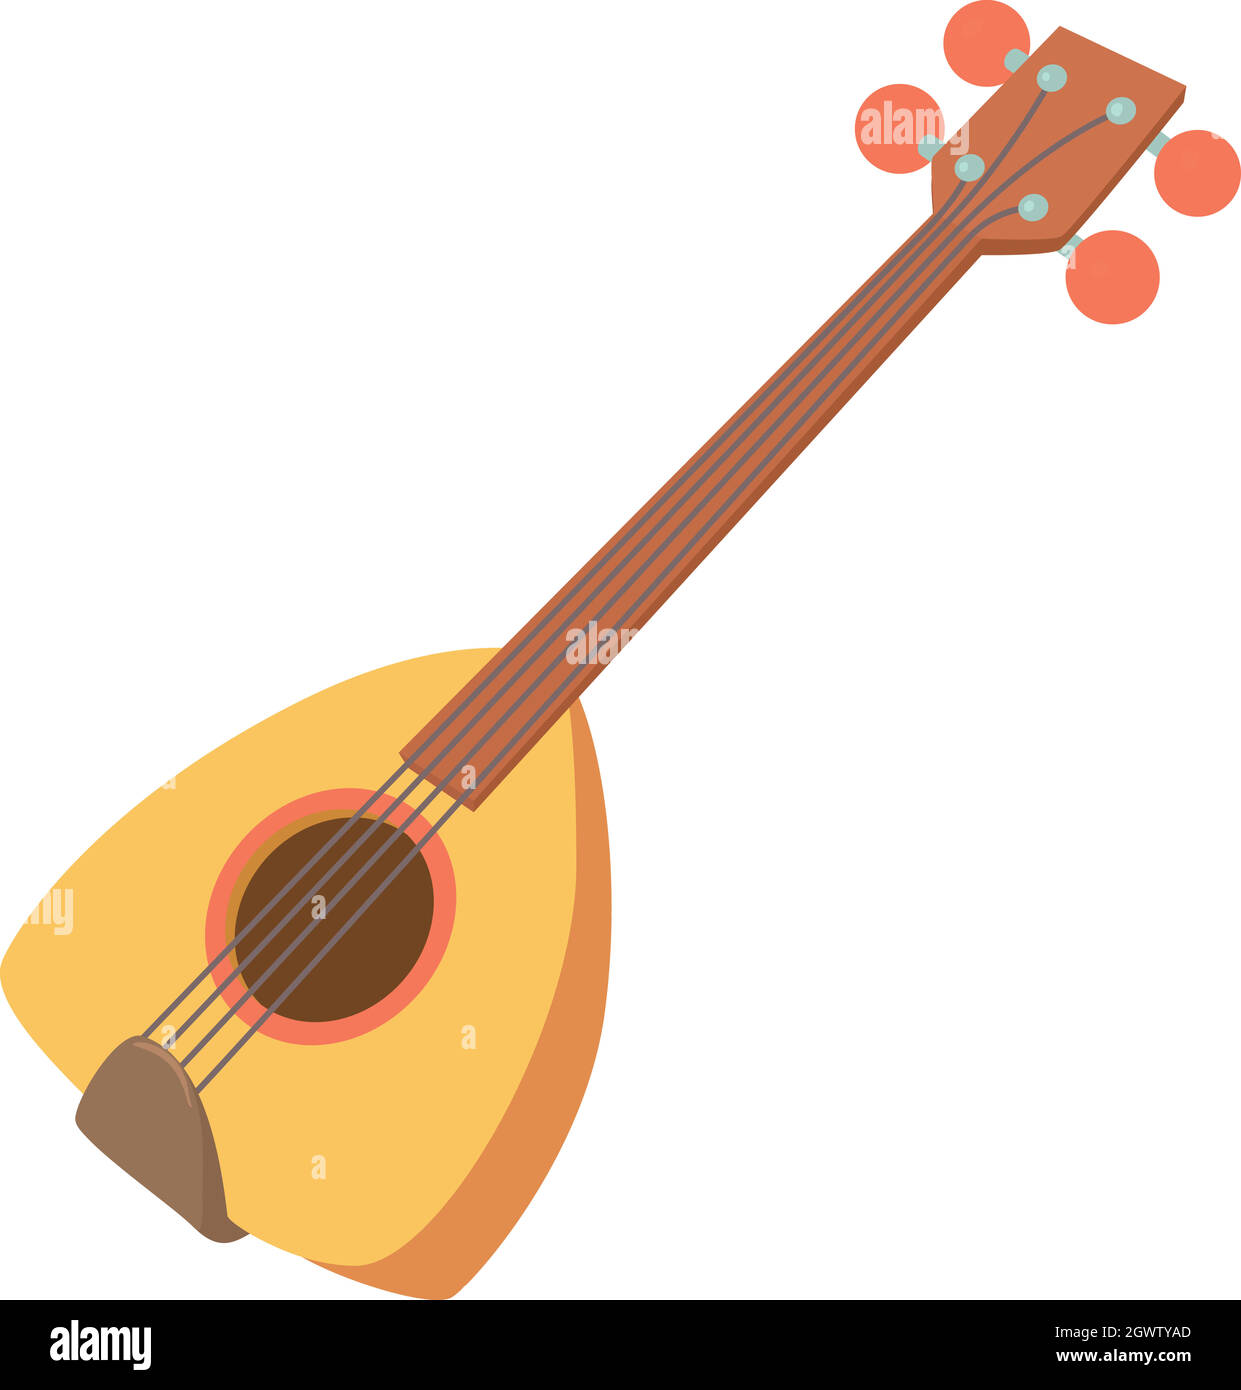 Arabic Guitar High Resolution Stock Photography and Images - Alamy